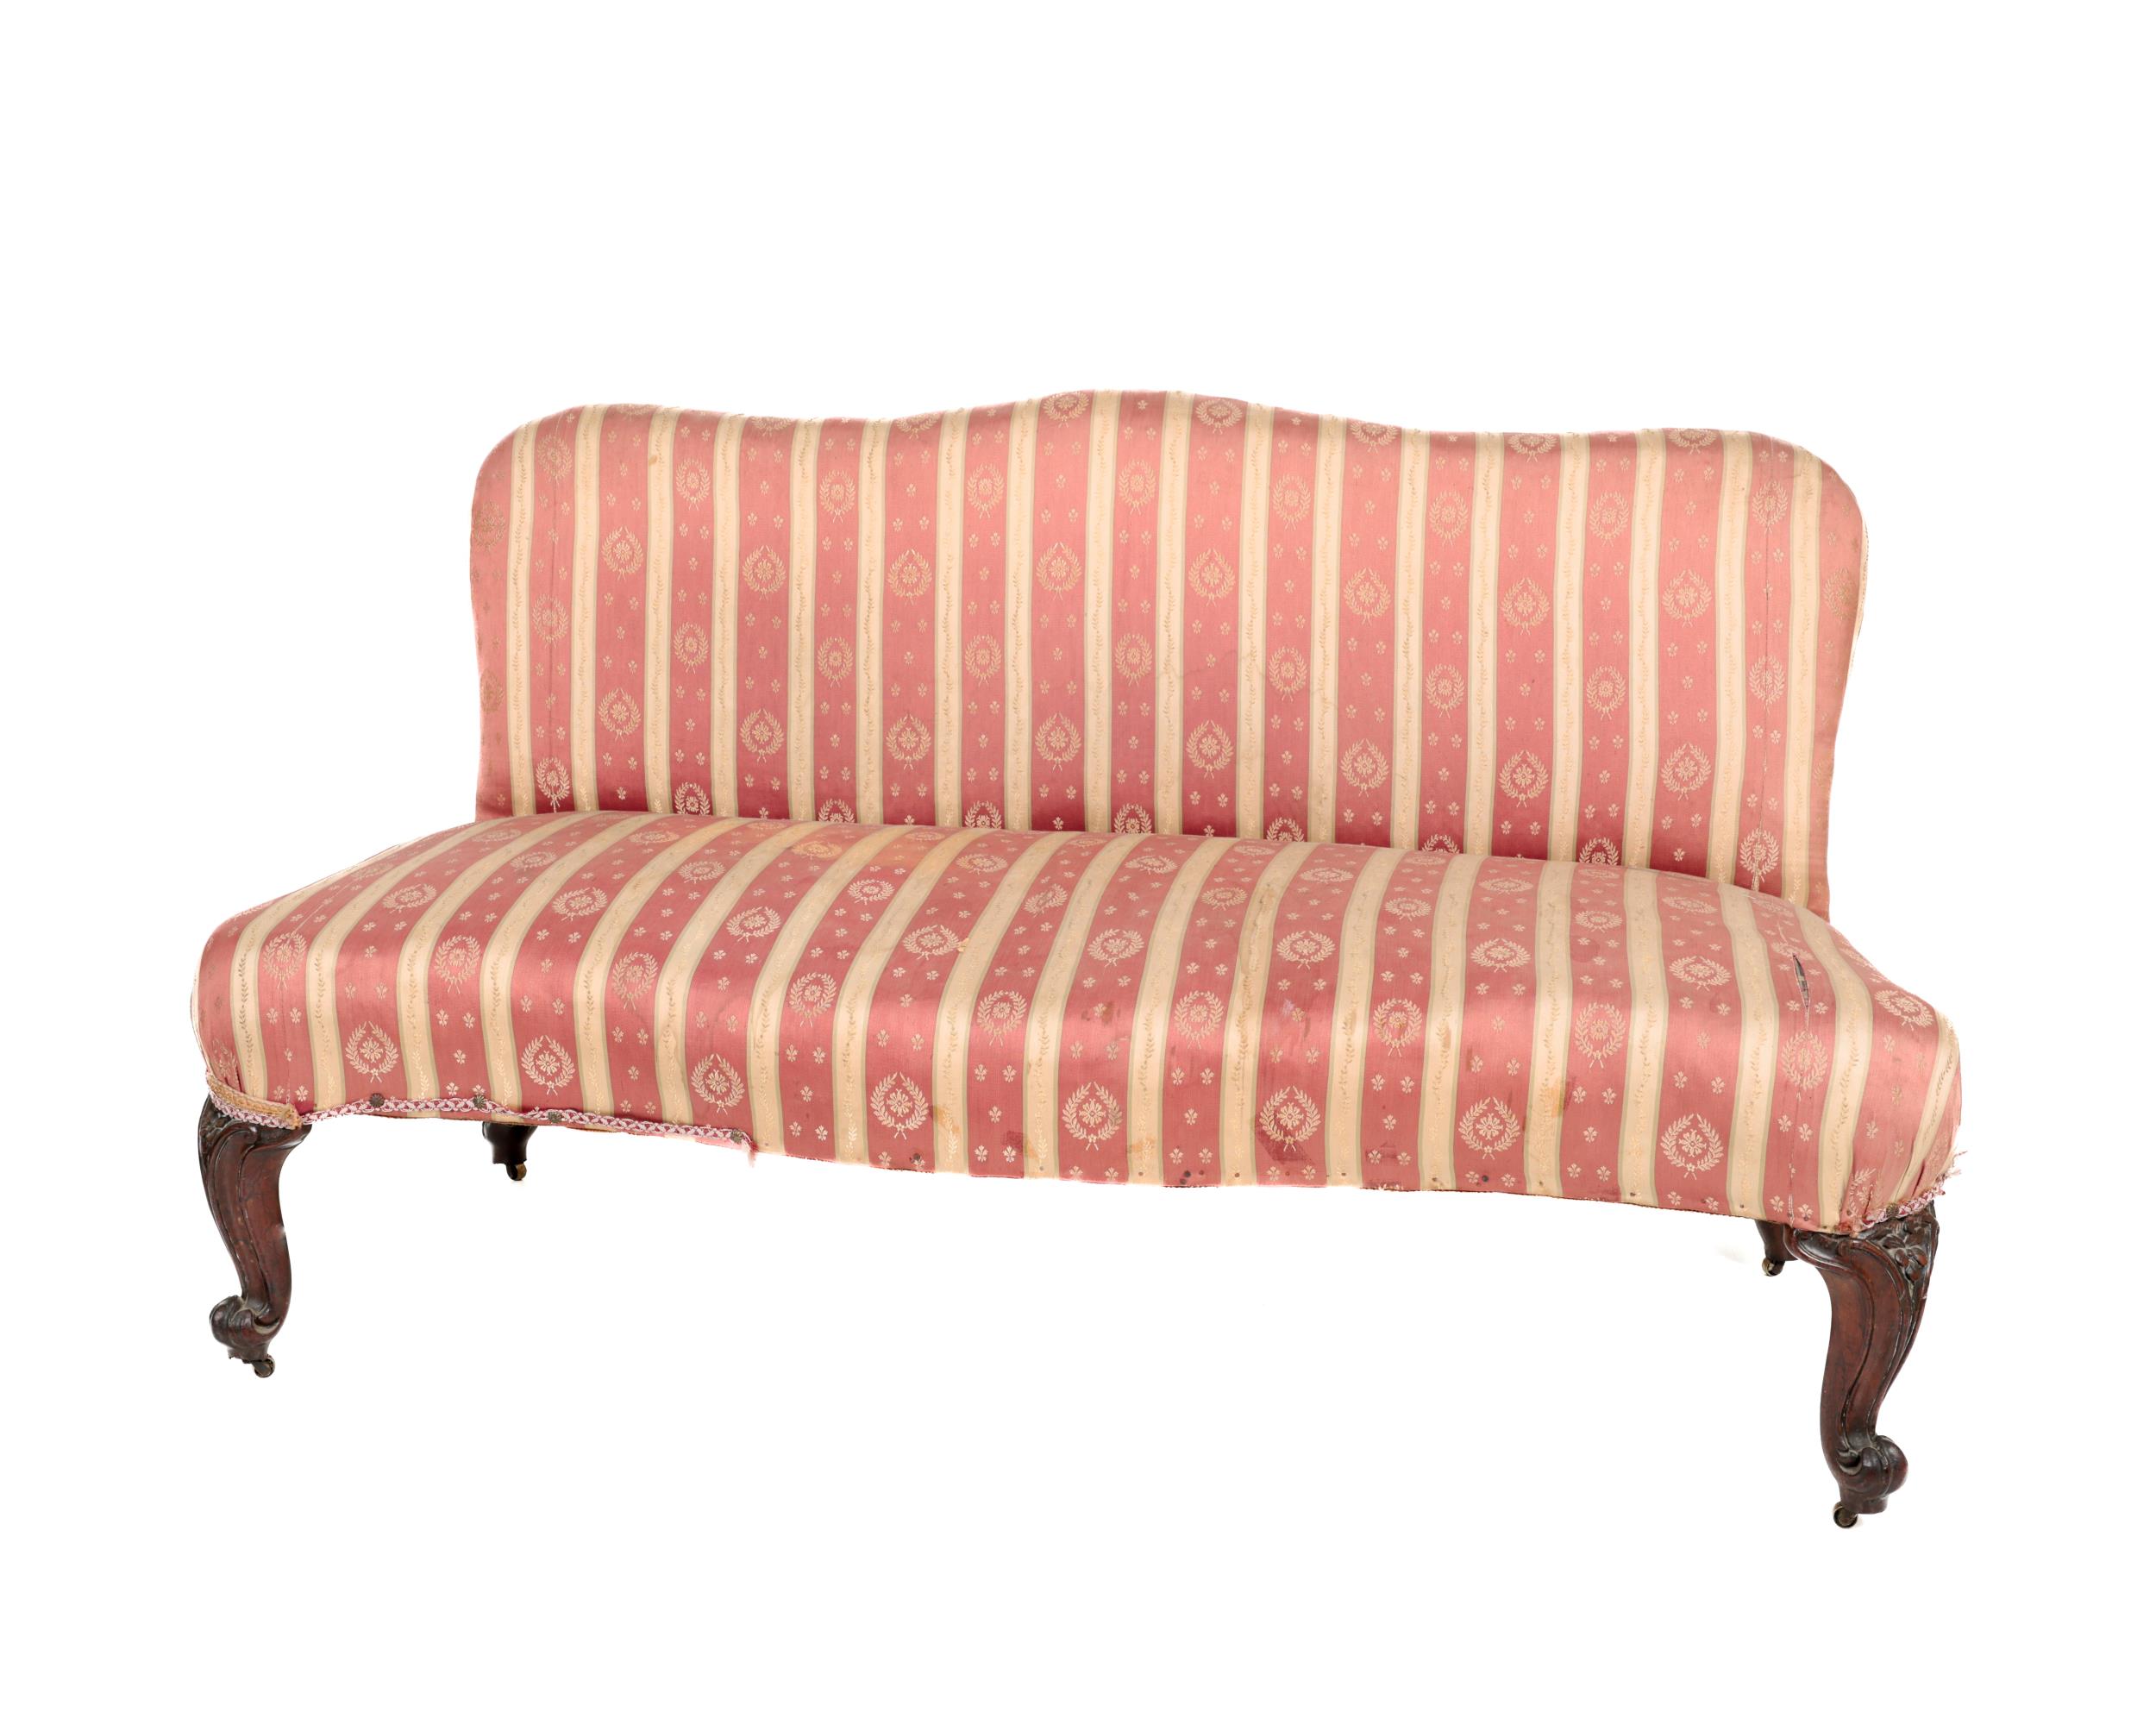 A Victorian mahogany framed humpback Couch or Window Seat, covered in Regency stripe fabric on front